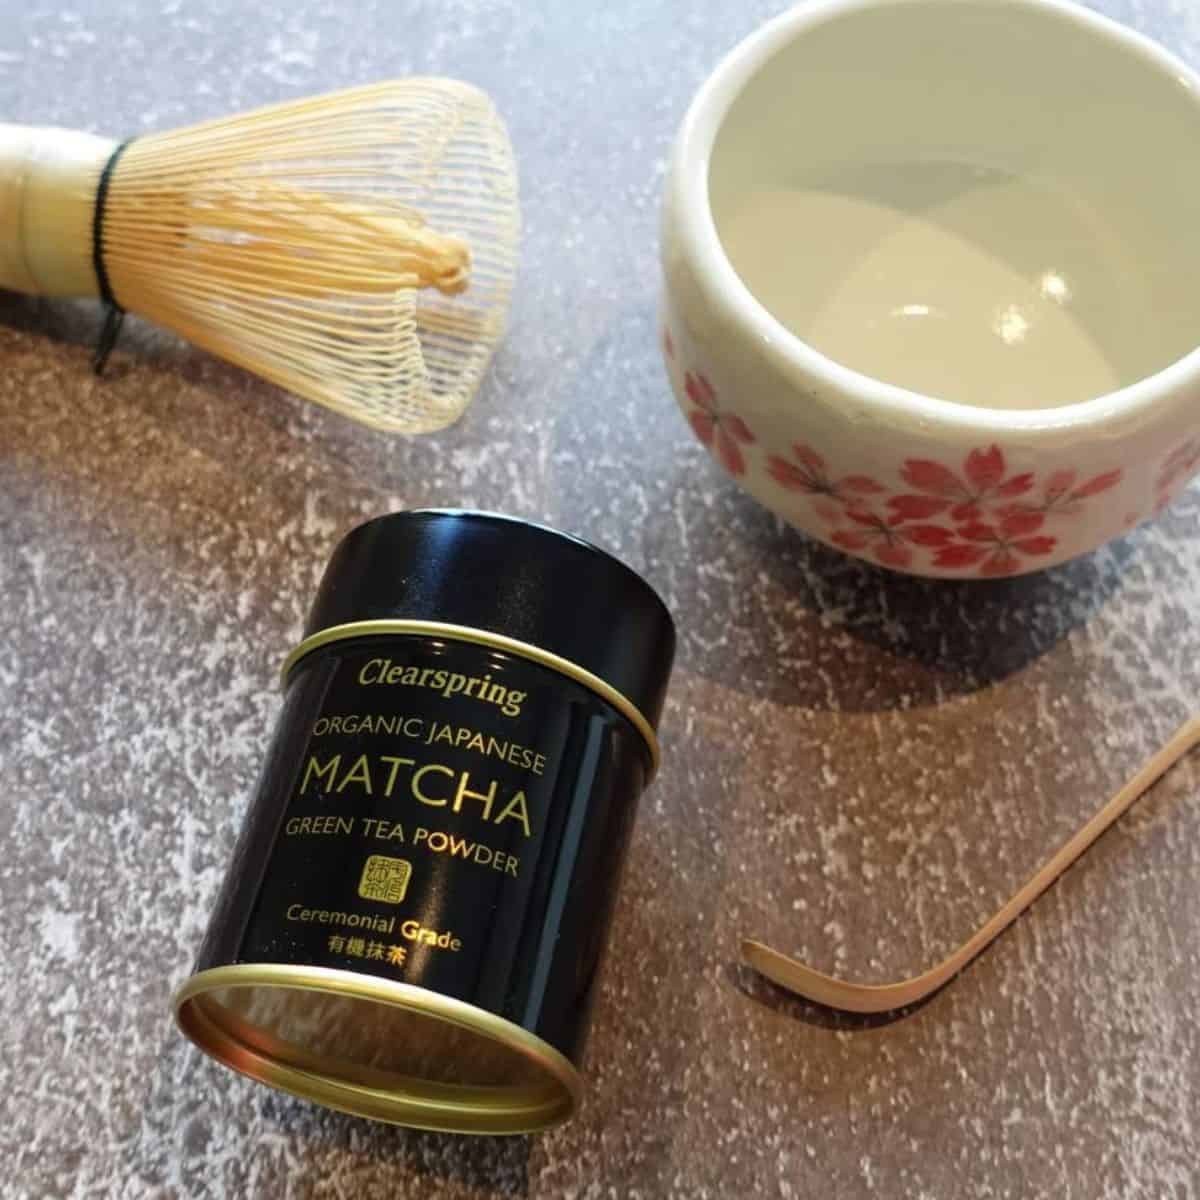 Clearspring ceremonial matcha powder